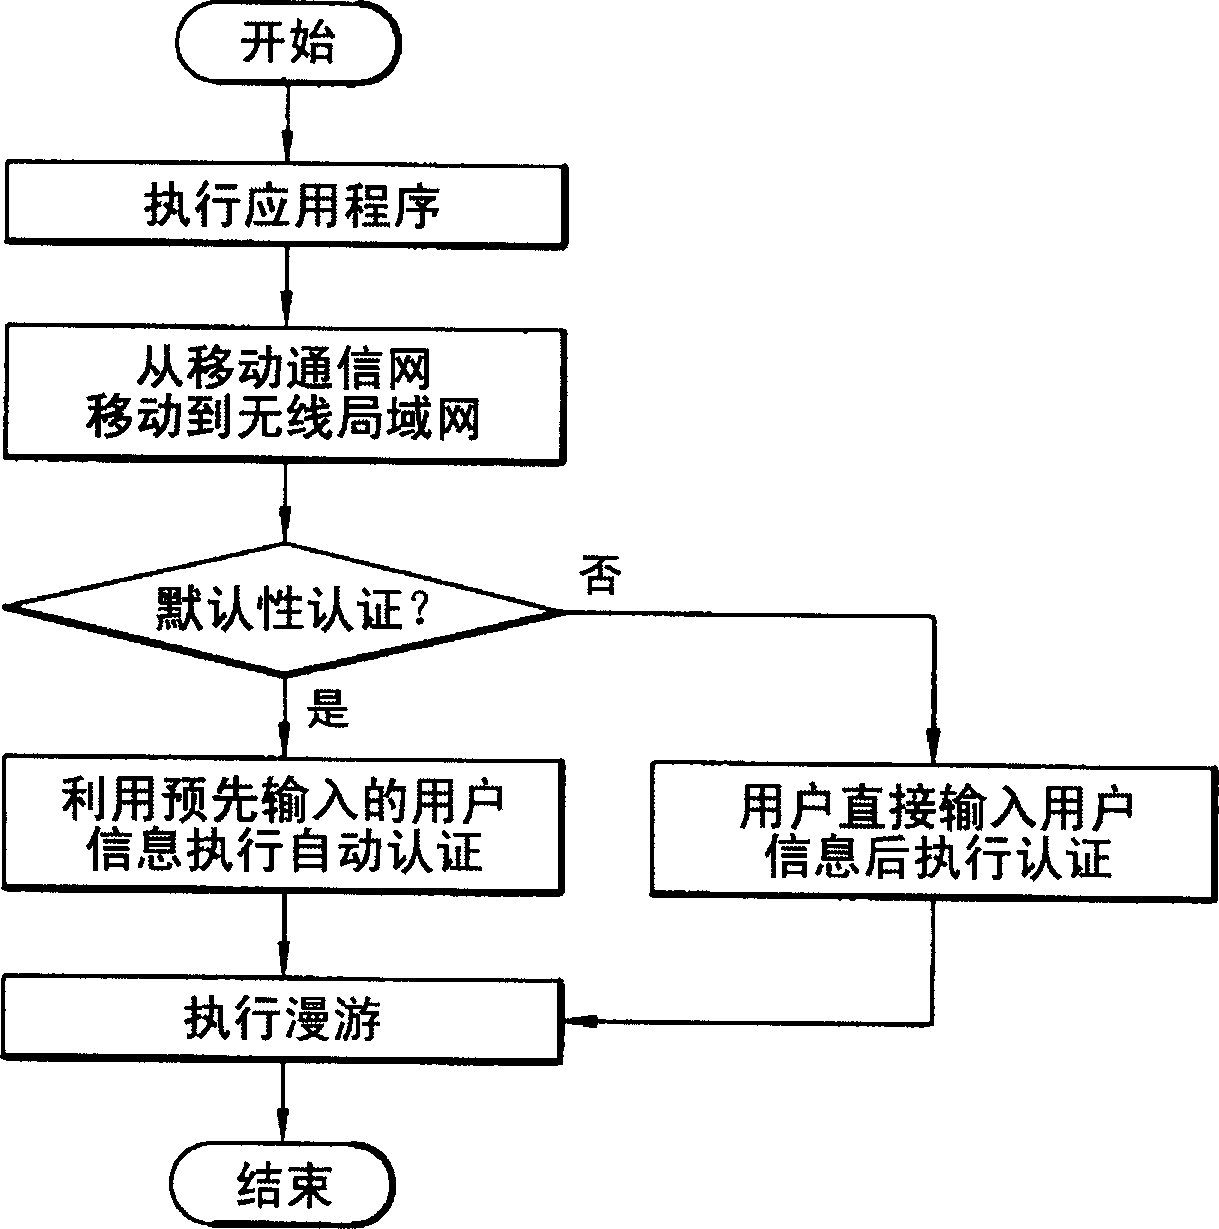 User identification method of mobile communication terminal in wireless local area network